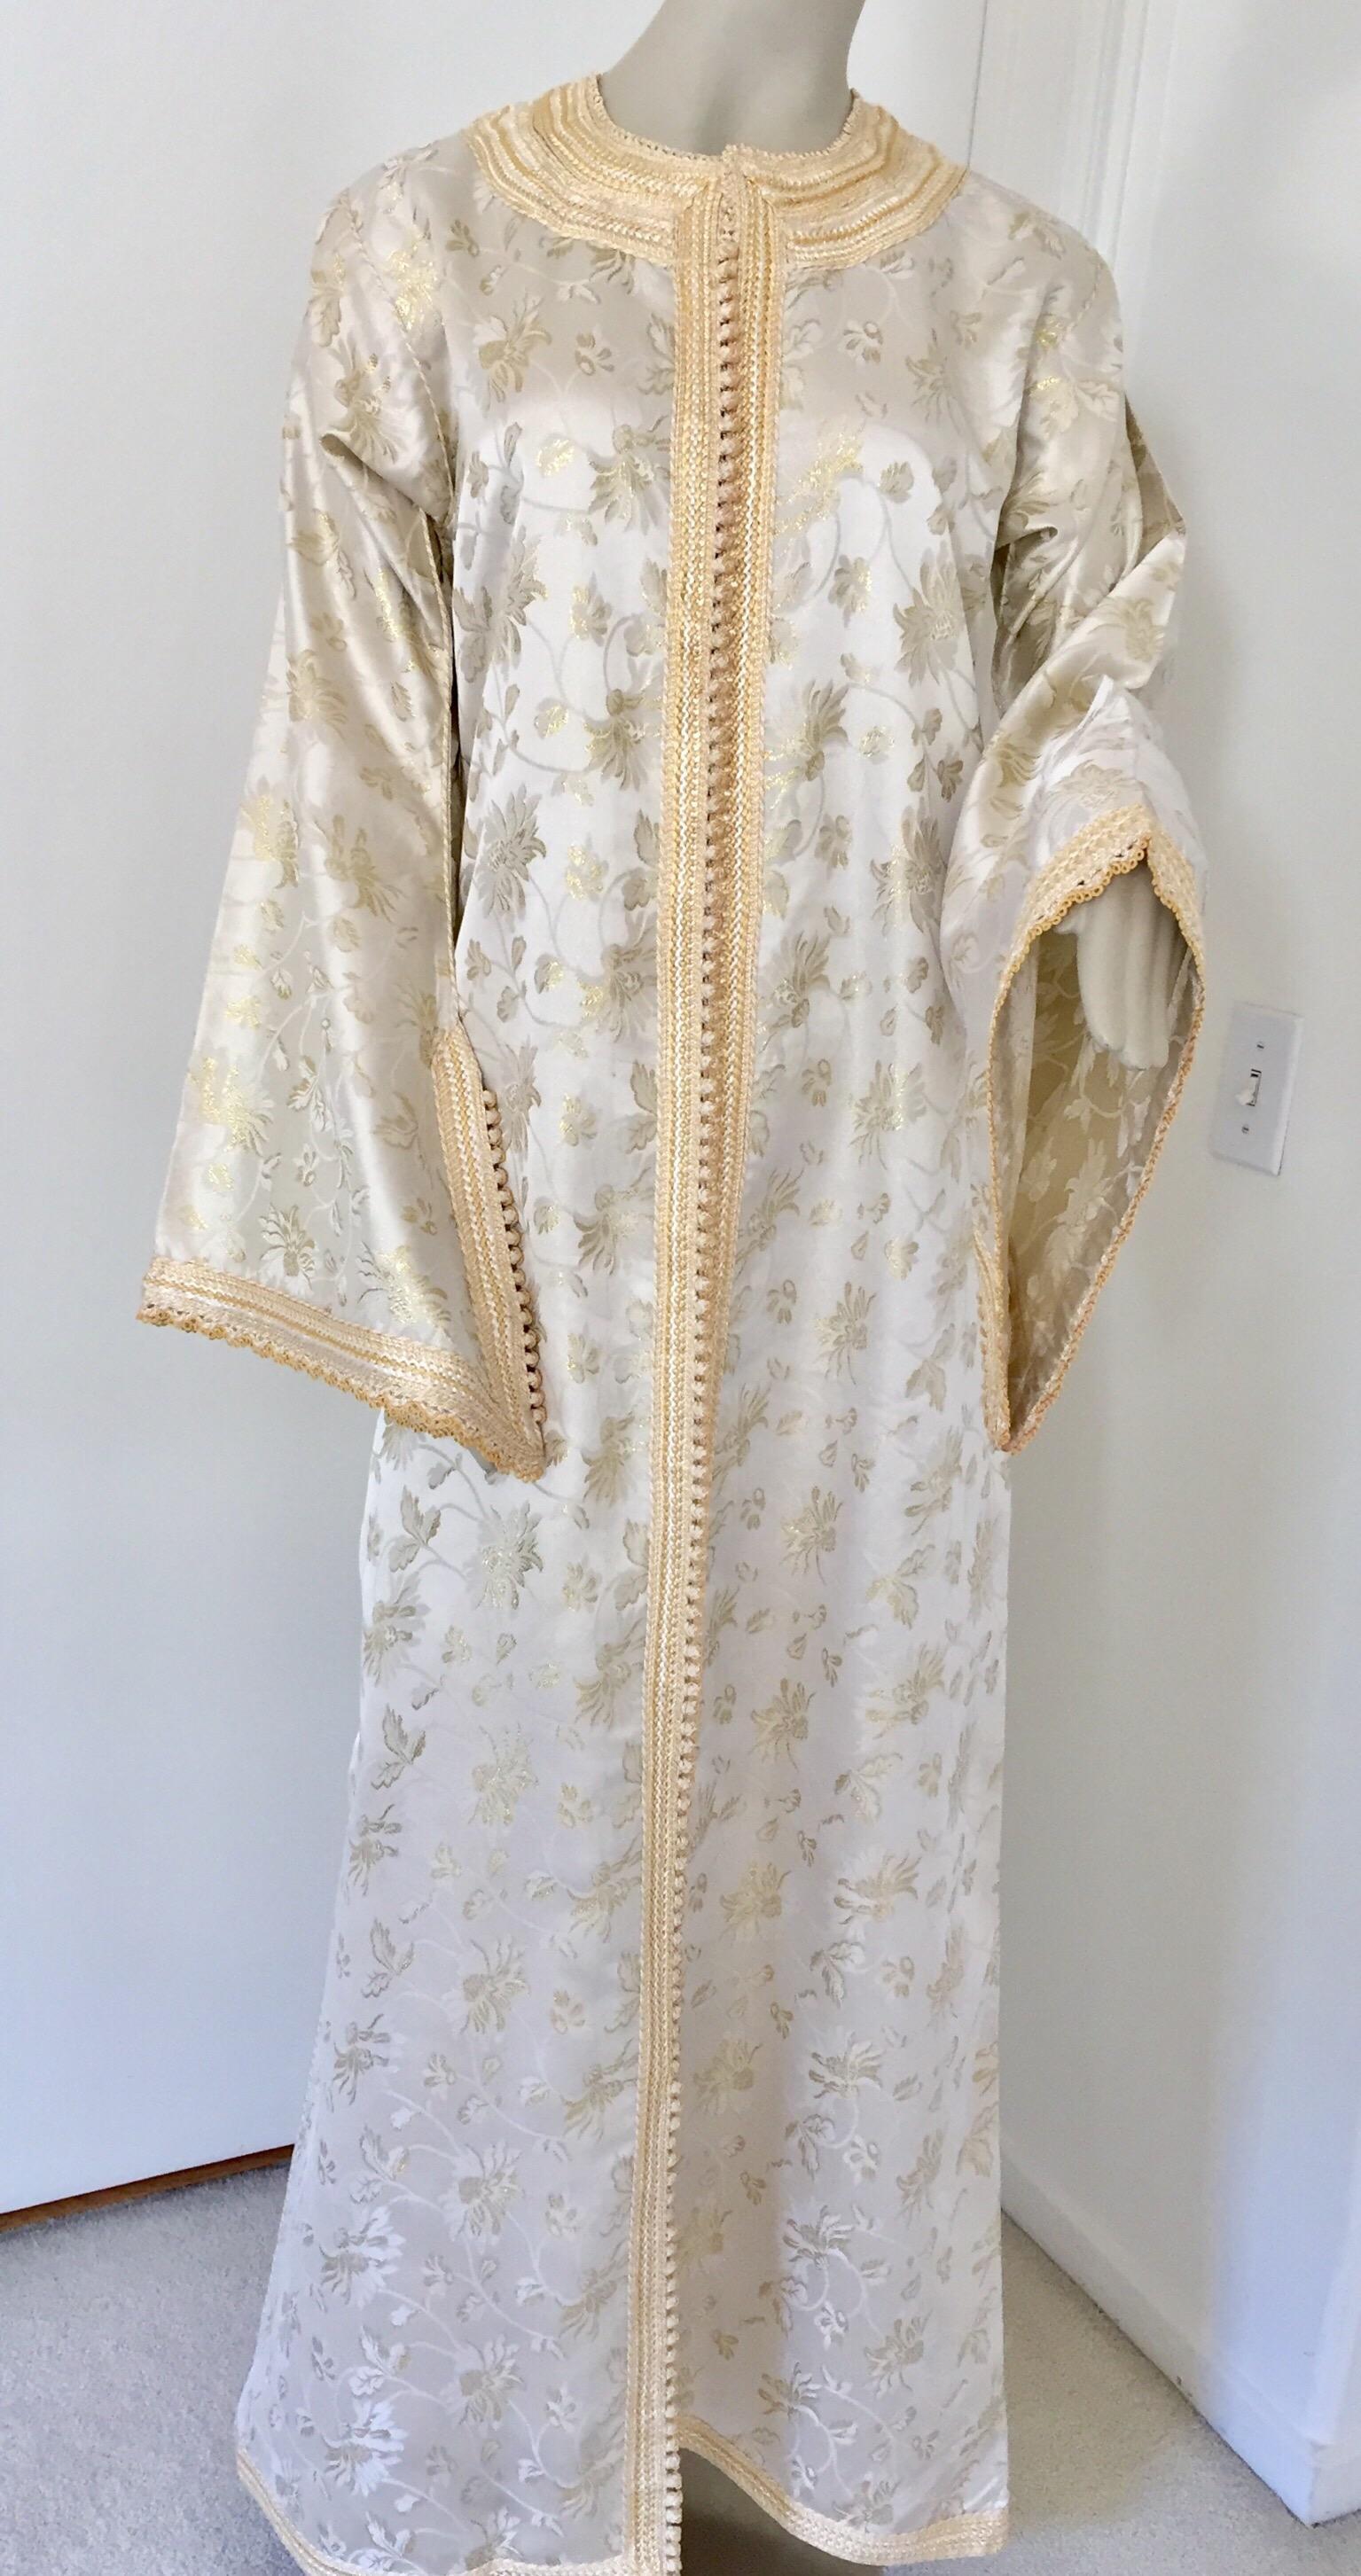 Elegant Moroccan Caftan White and Gold Metallic Floral Brocade For Sale 4